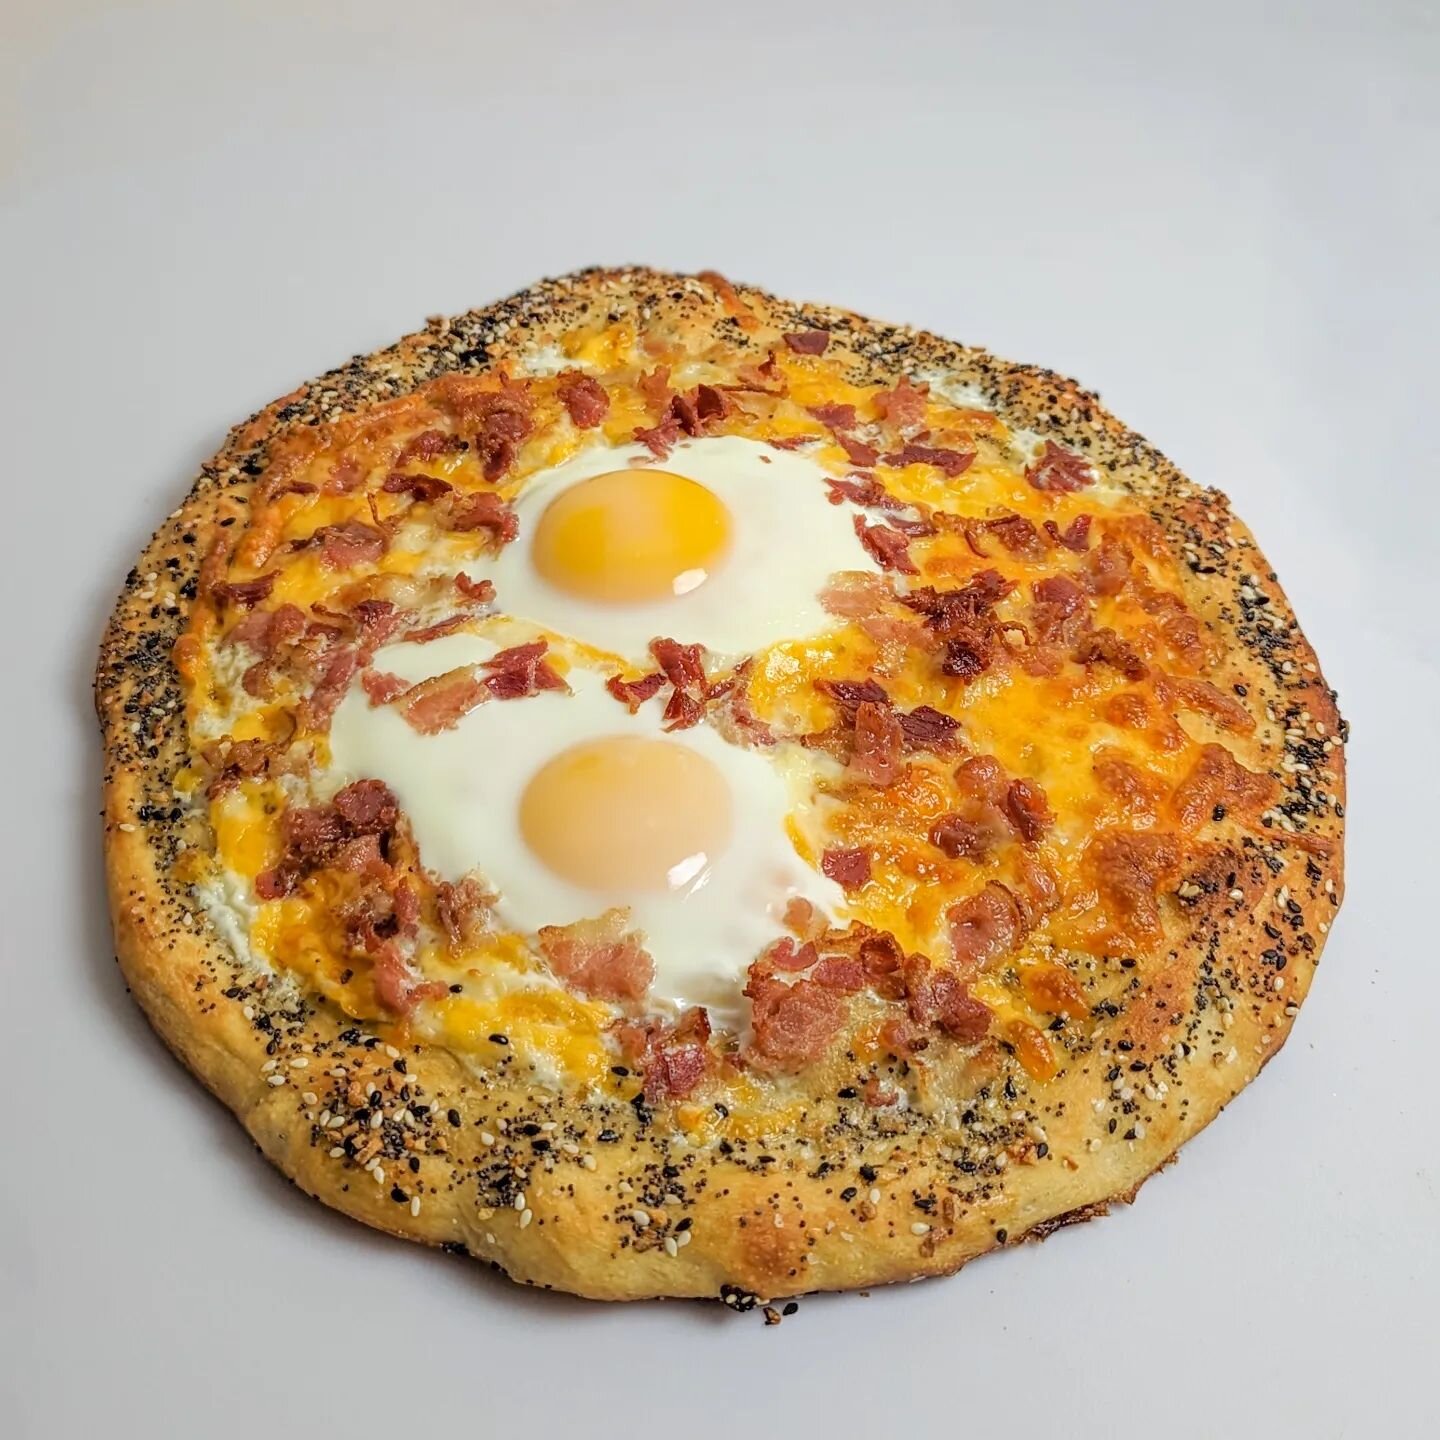 Breakfast pizza with cheese, bacon, and sunny side eggs 🍳🥓